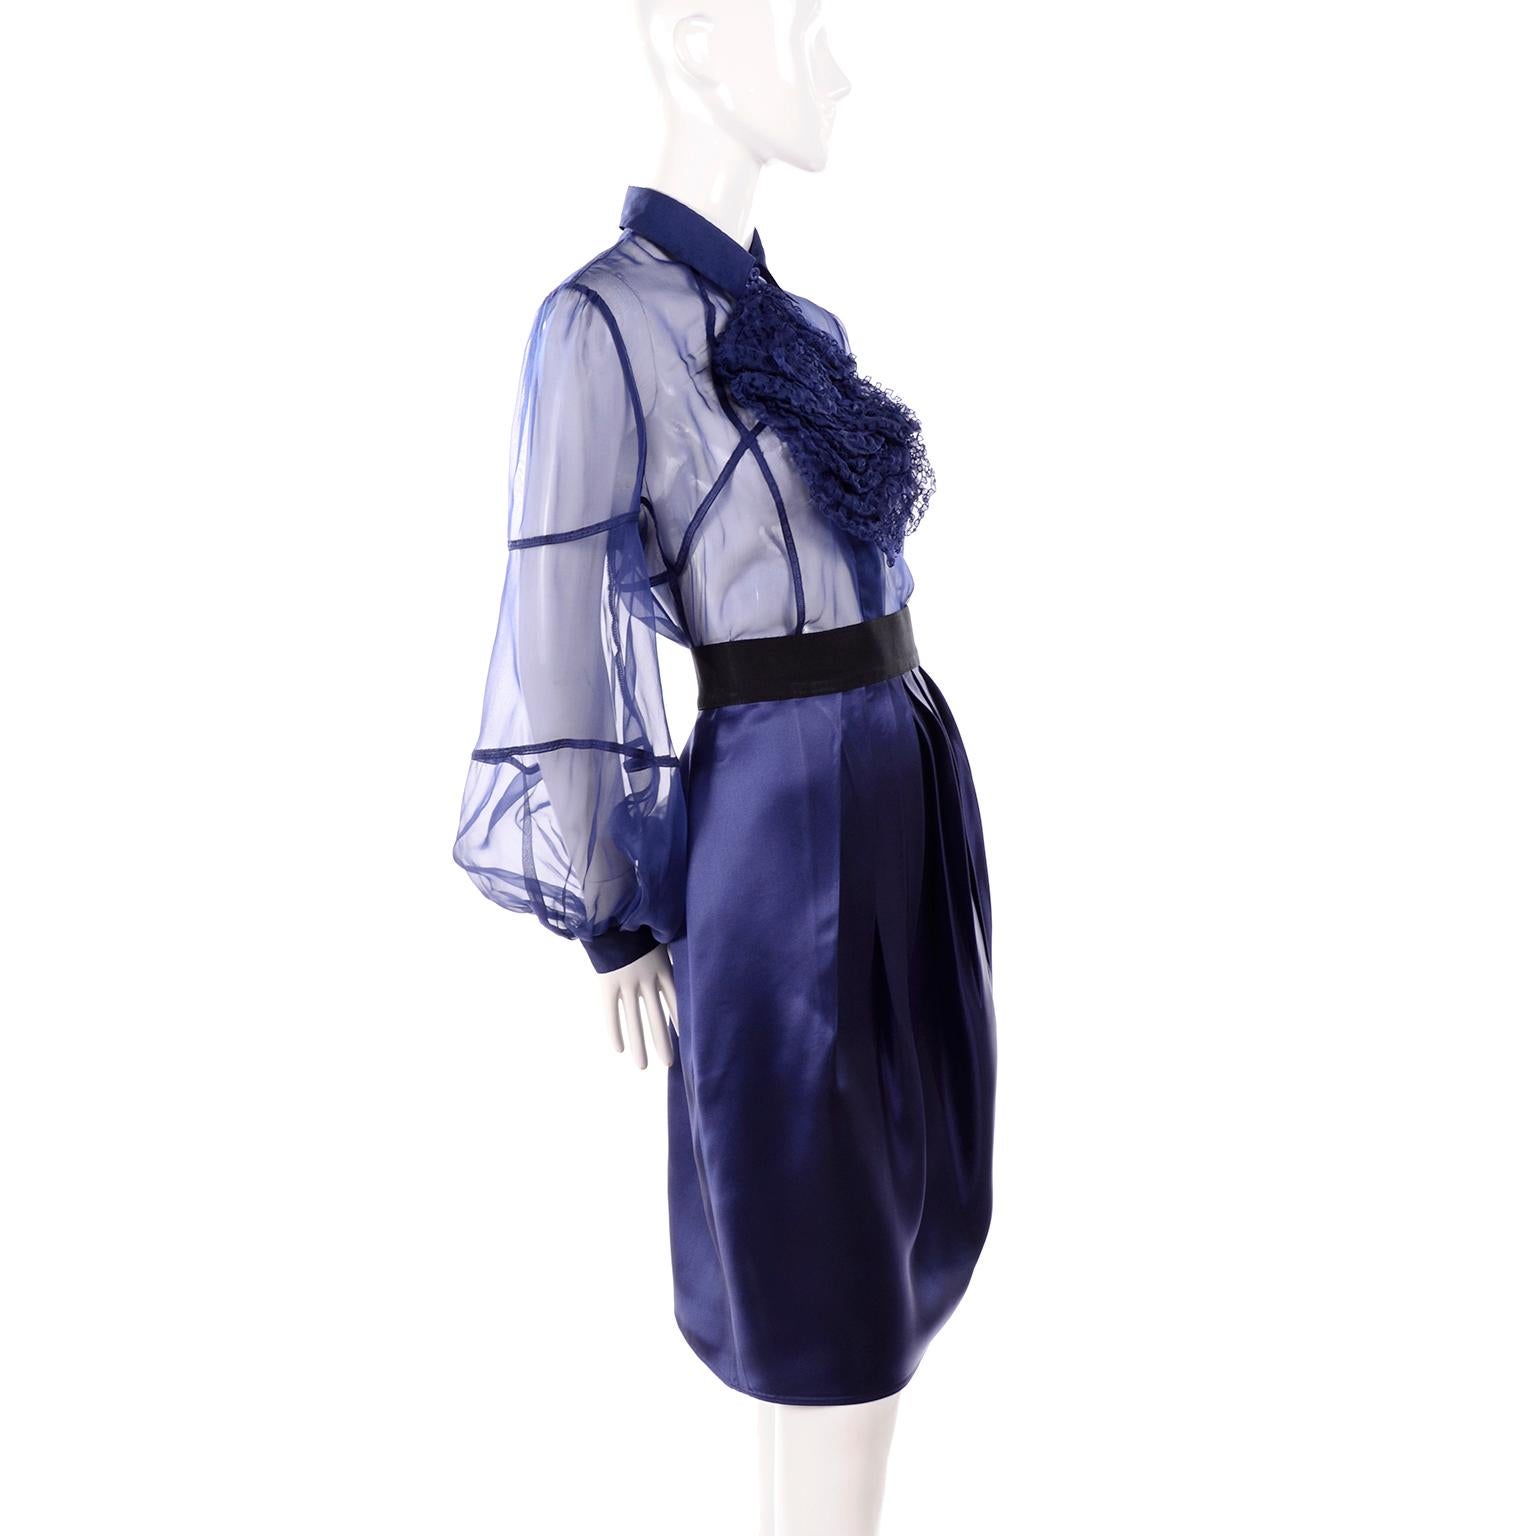 This stunning blouse and skirt ensemble is from the Valentino Fall Winter 2008 Collection. It was shown on the runway with a jacket and we have attached an image of that suit for you to see. We love the ruffled piece on the sheer blue blouse and the